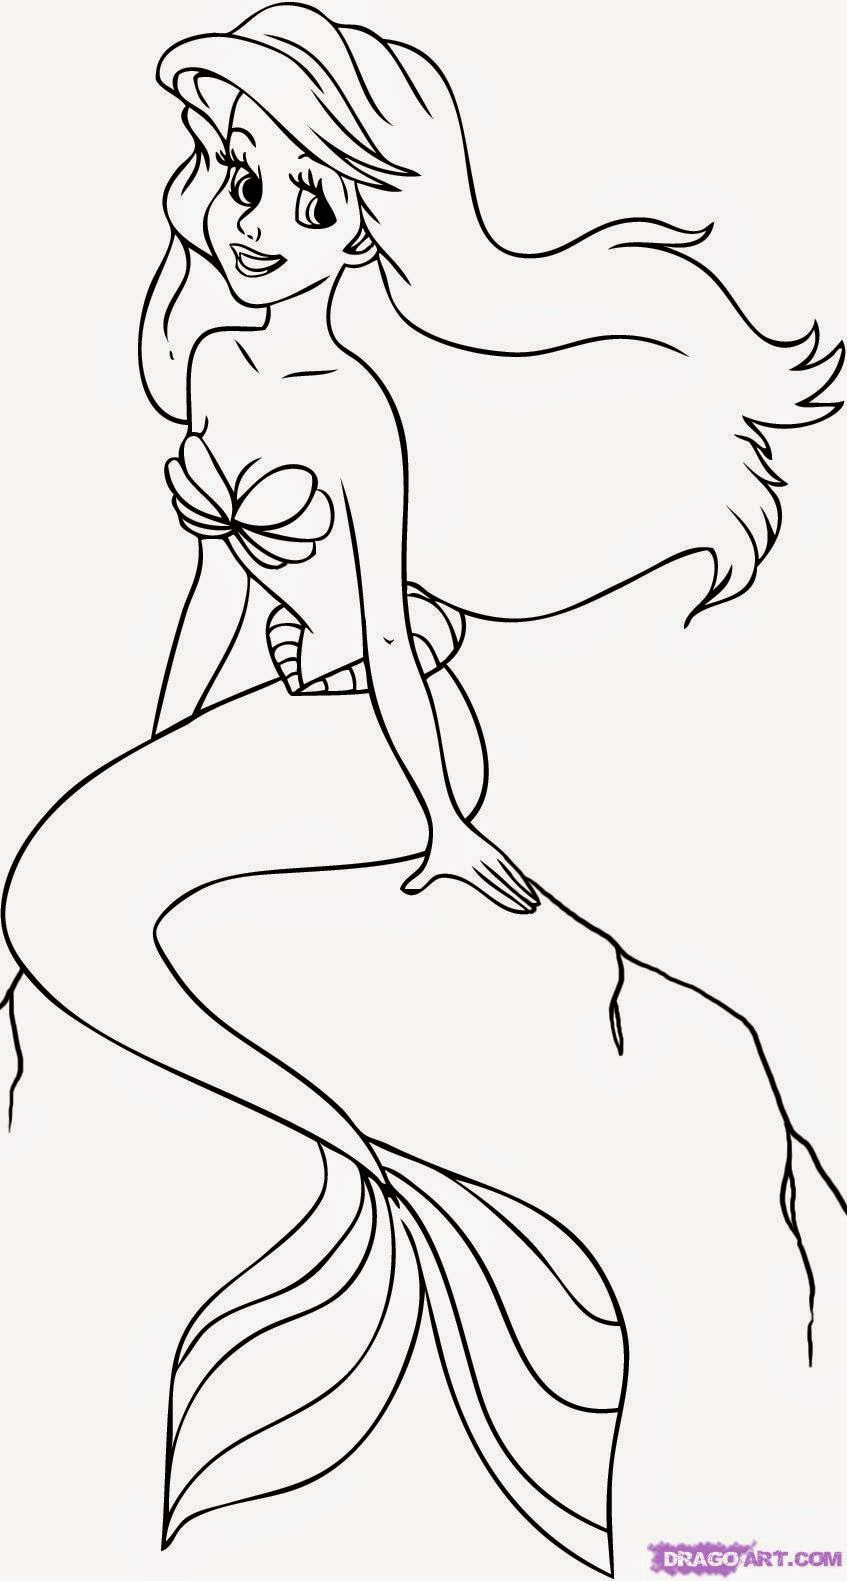 Little Mermaid Printable Coloring Pages
 Coloring Pages Ariel the Little Mermaid Free Printable